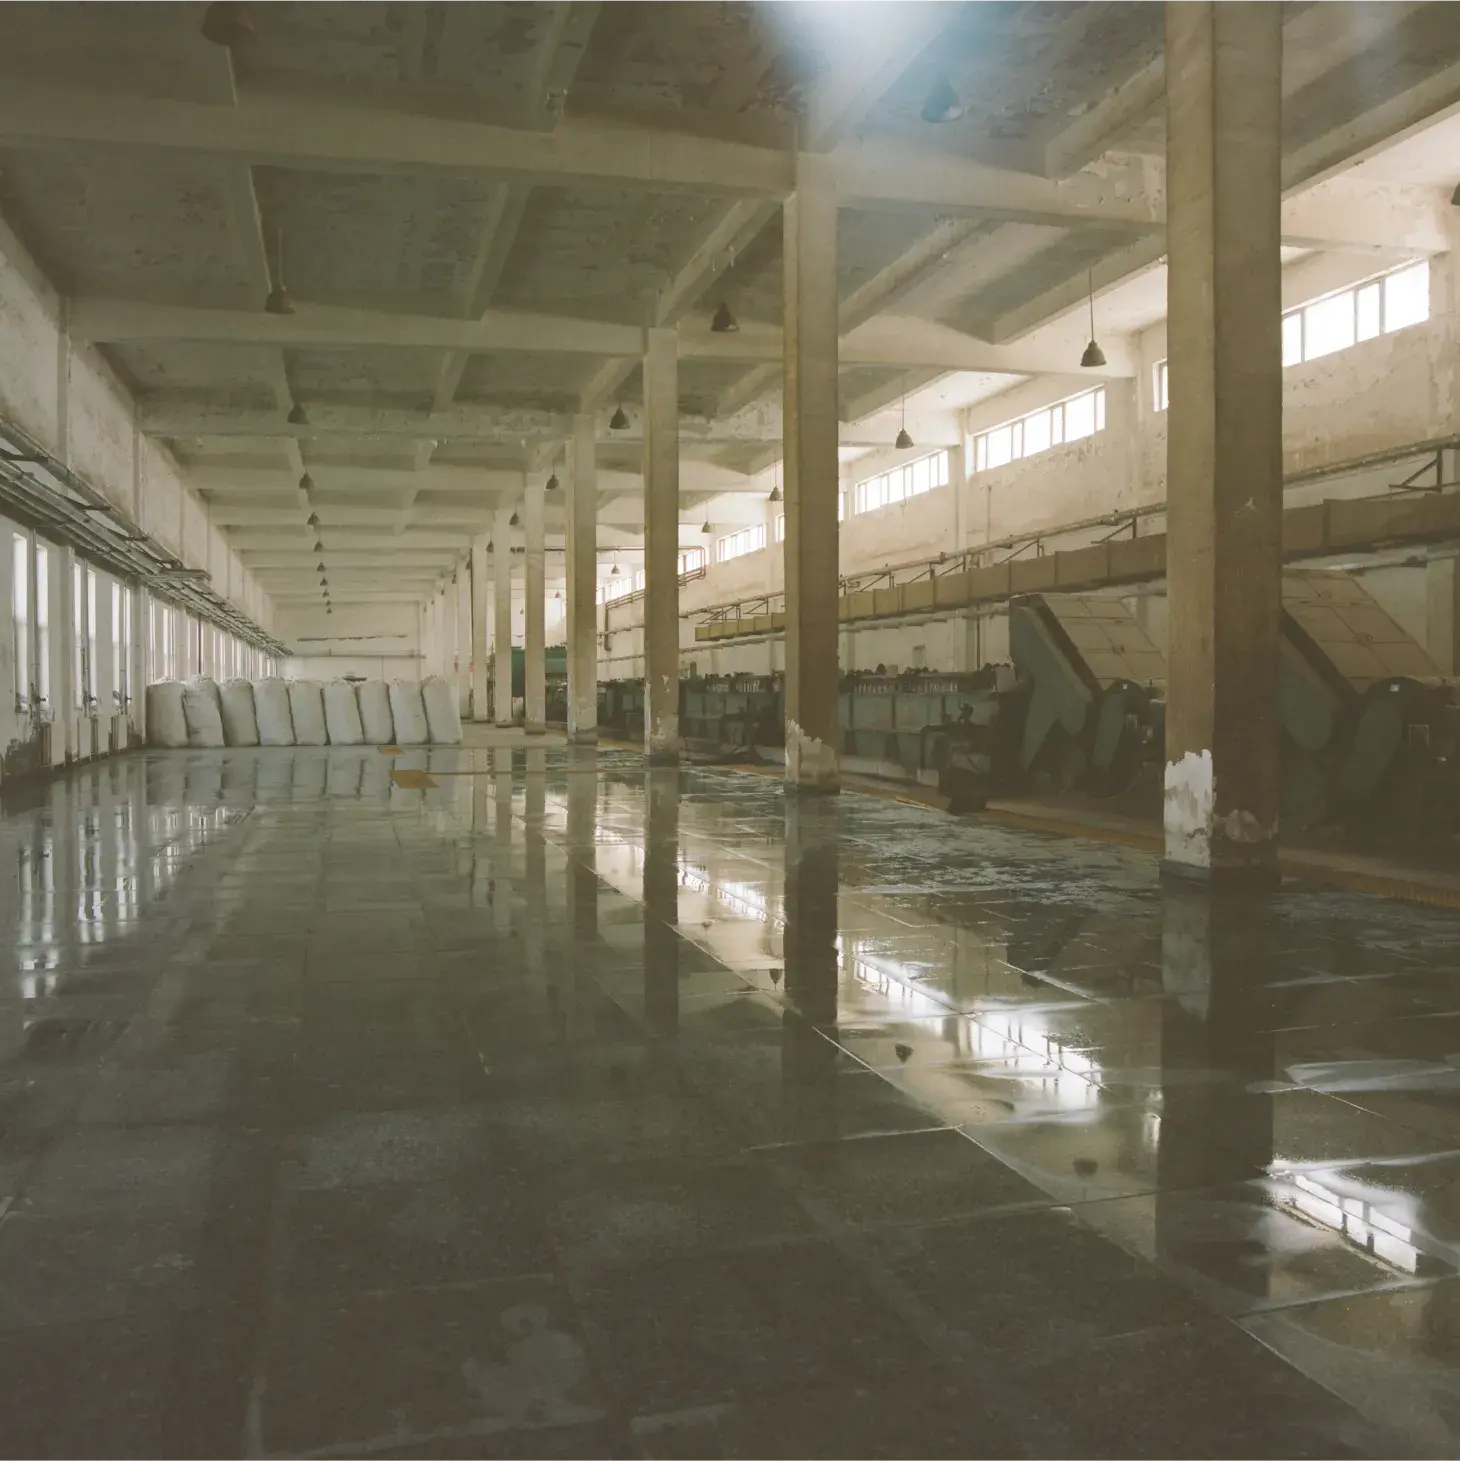 Empty factory floor with bags of wool in the background